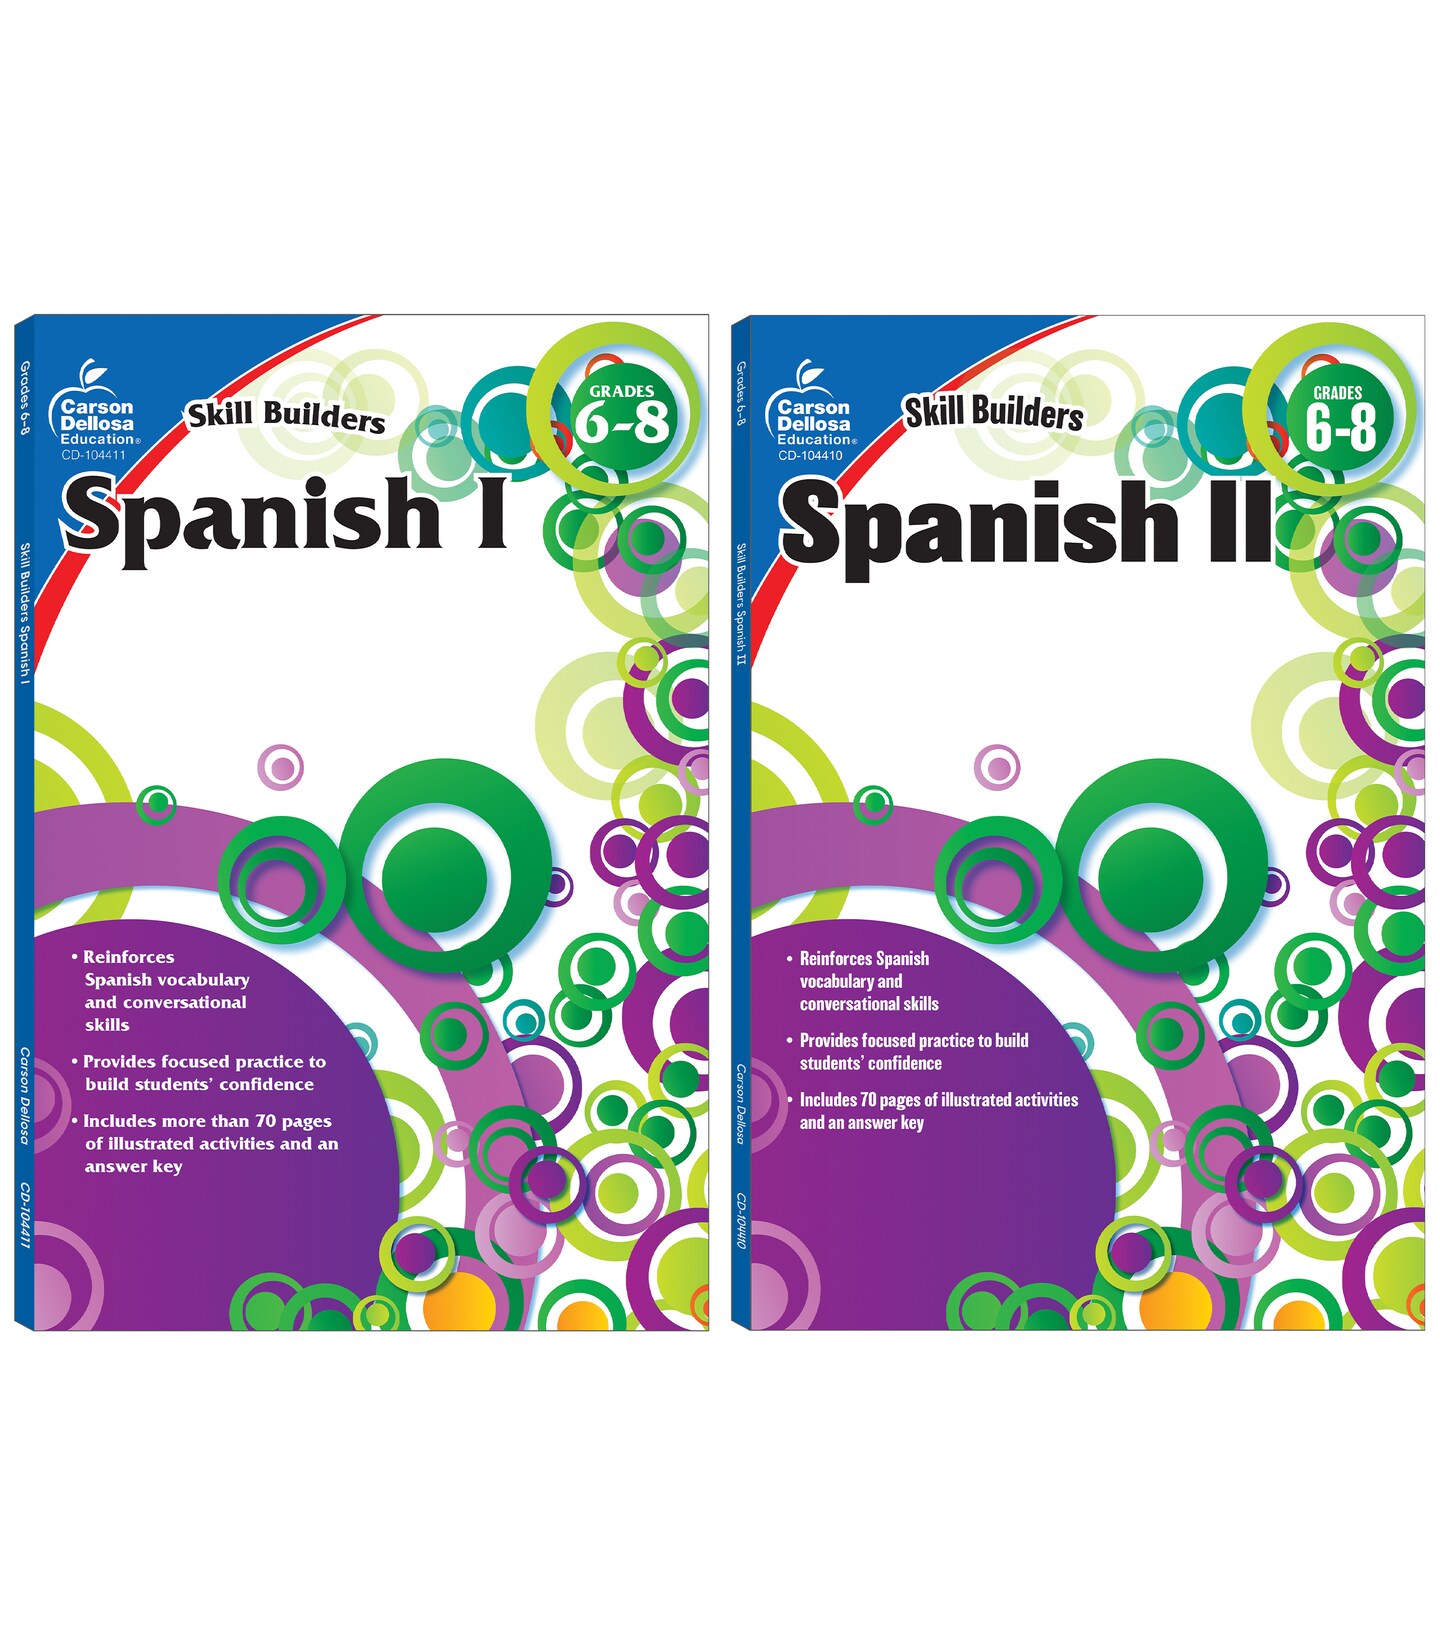 Carson Dellosa Skill Builders Grades 6-8 Spanish Workbook Set, Spanish Vocabulary Builder for Kids Ages 11-14, 6th&#x2013; 8th Grade Spanish Books, Learn Spanish Parts of Speech, Common Phrases, and More